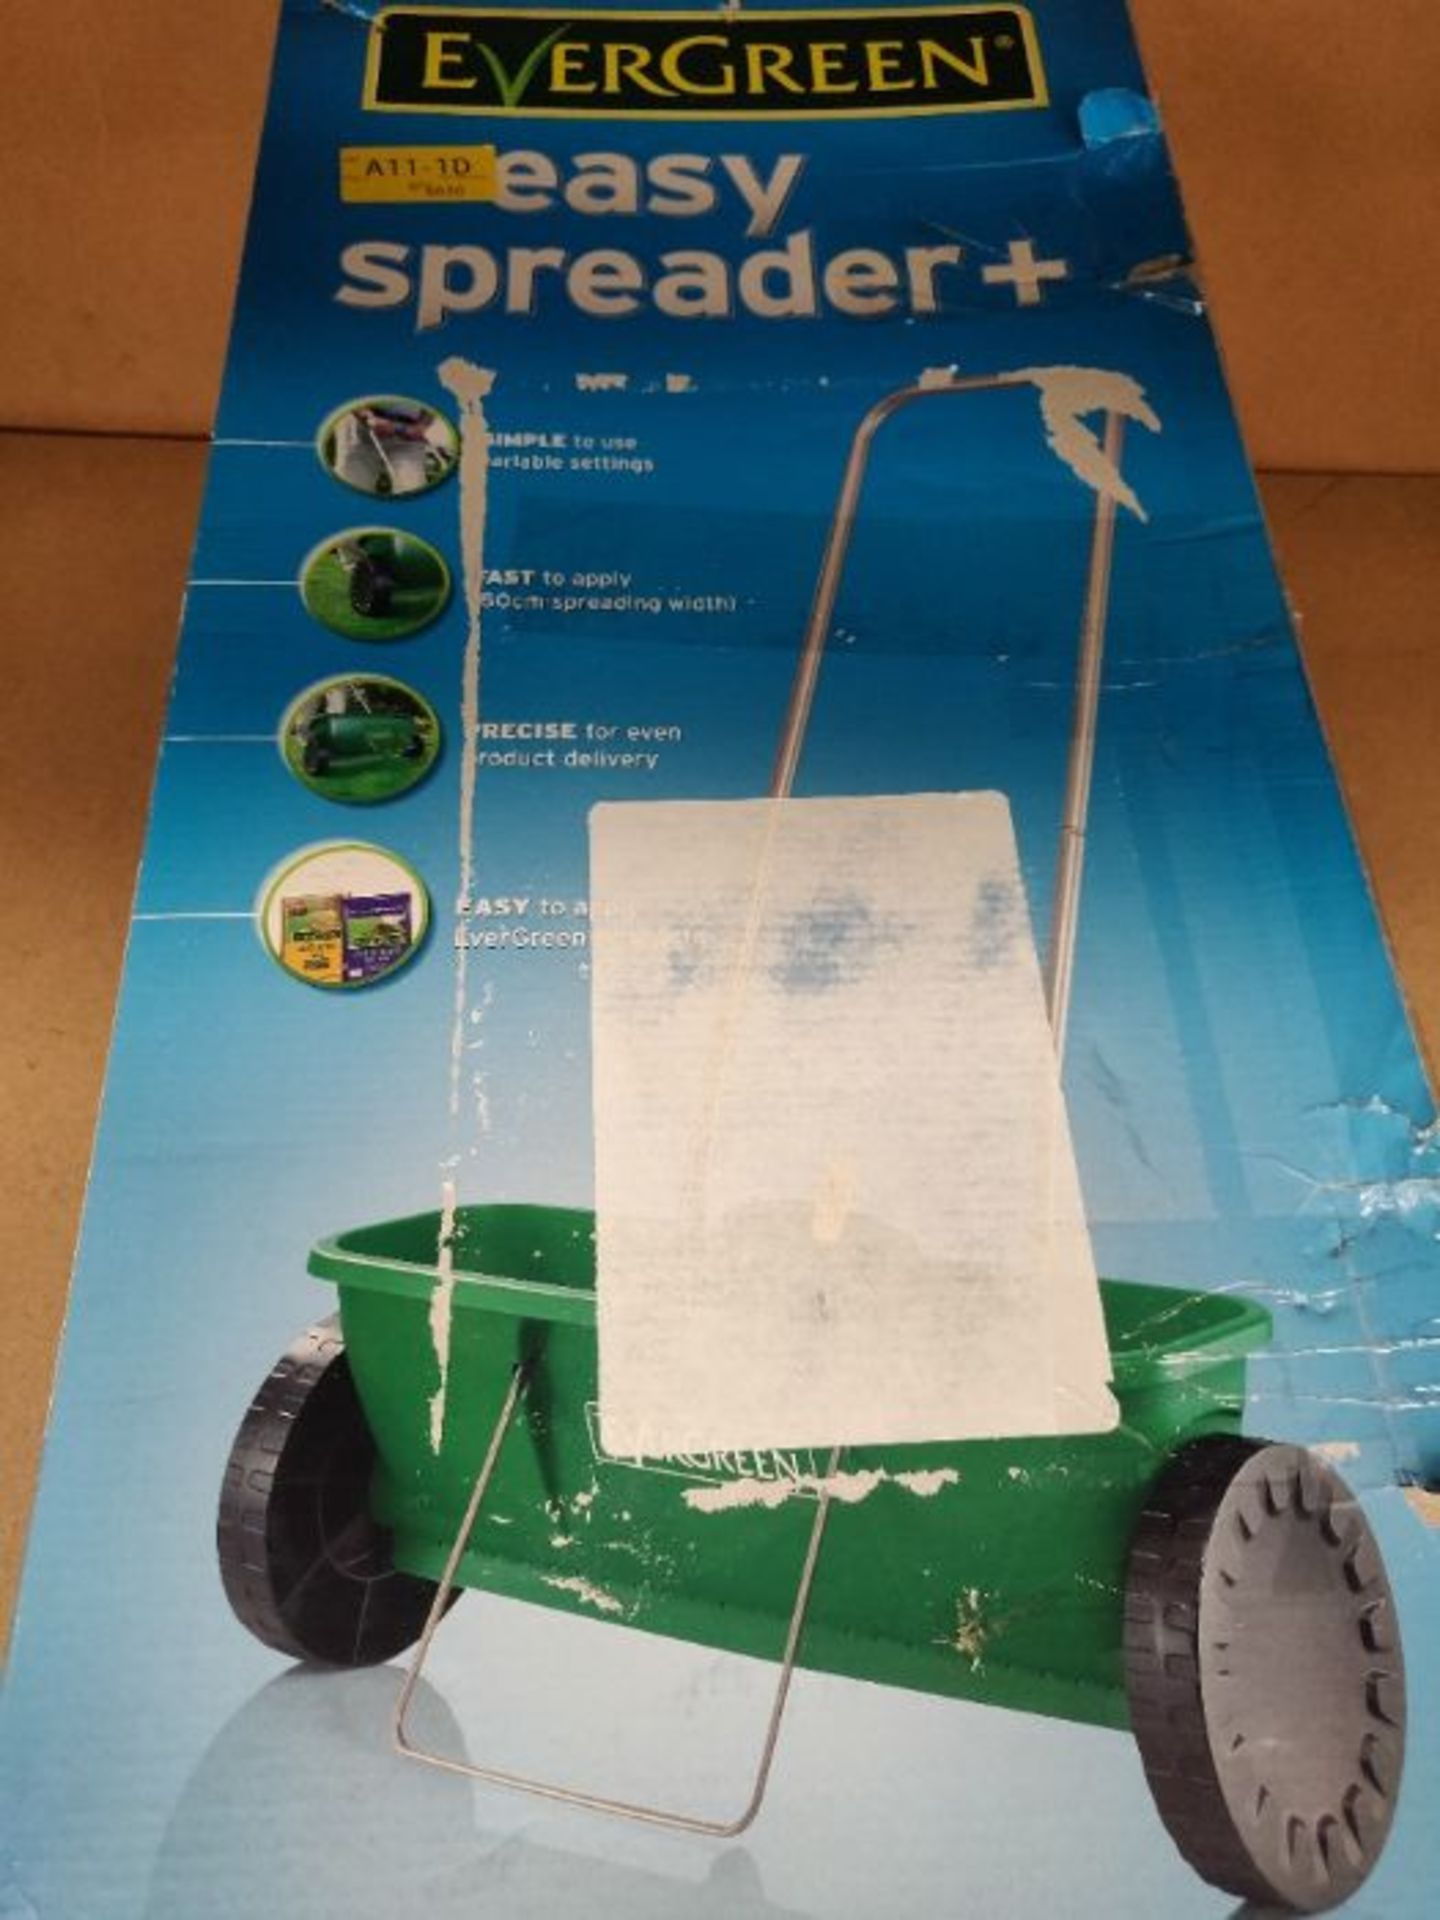 [CRACKED] EverGreen 18920 Easy Spreader Plus, 620.0 mm*240.0 mm*300.0 mm - Image 2 of 3